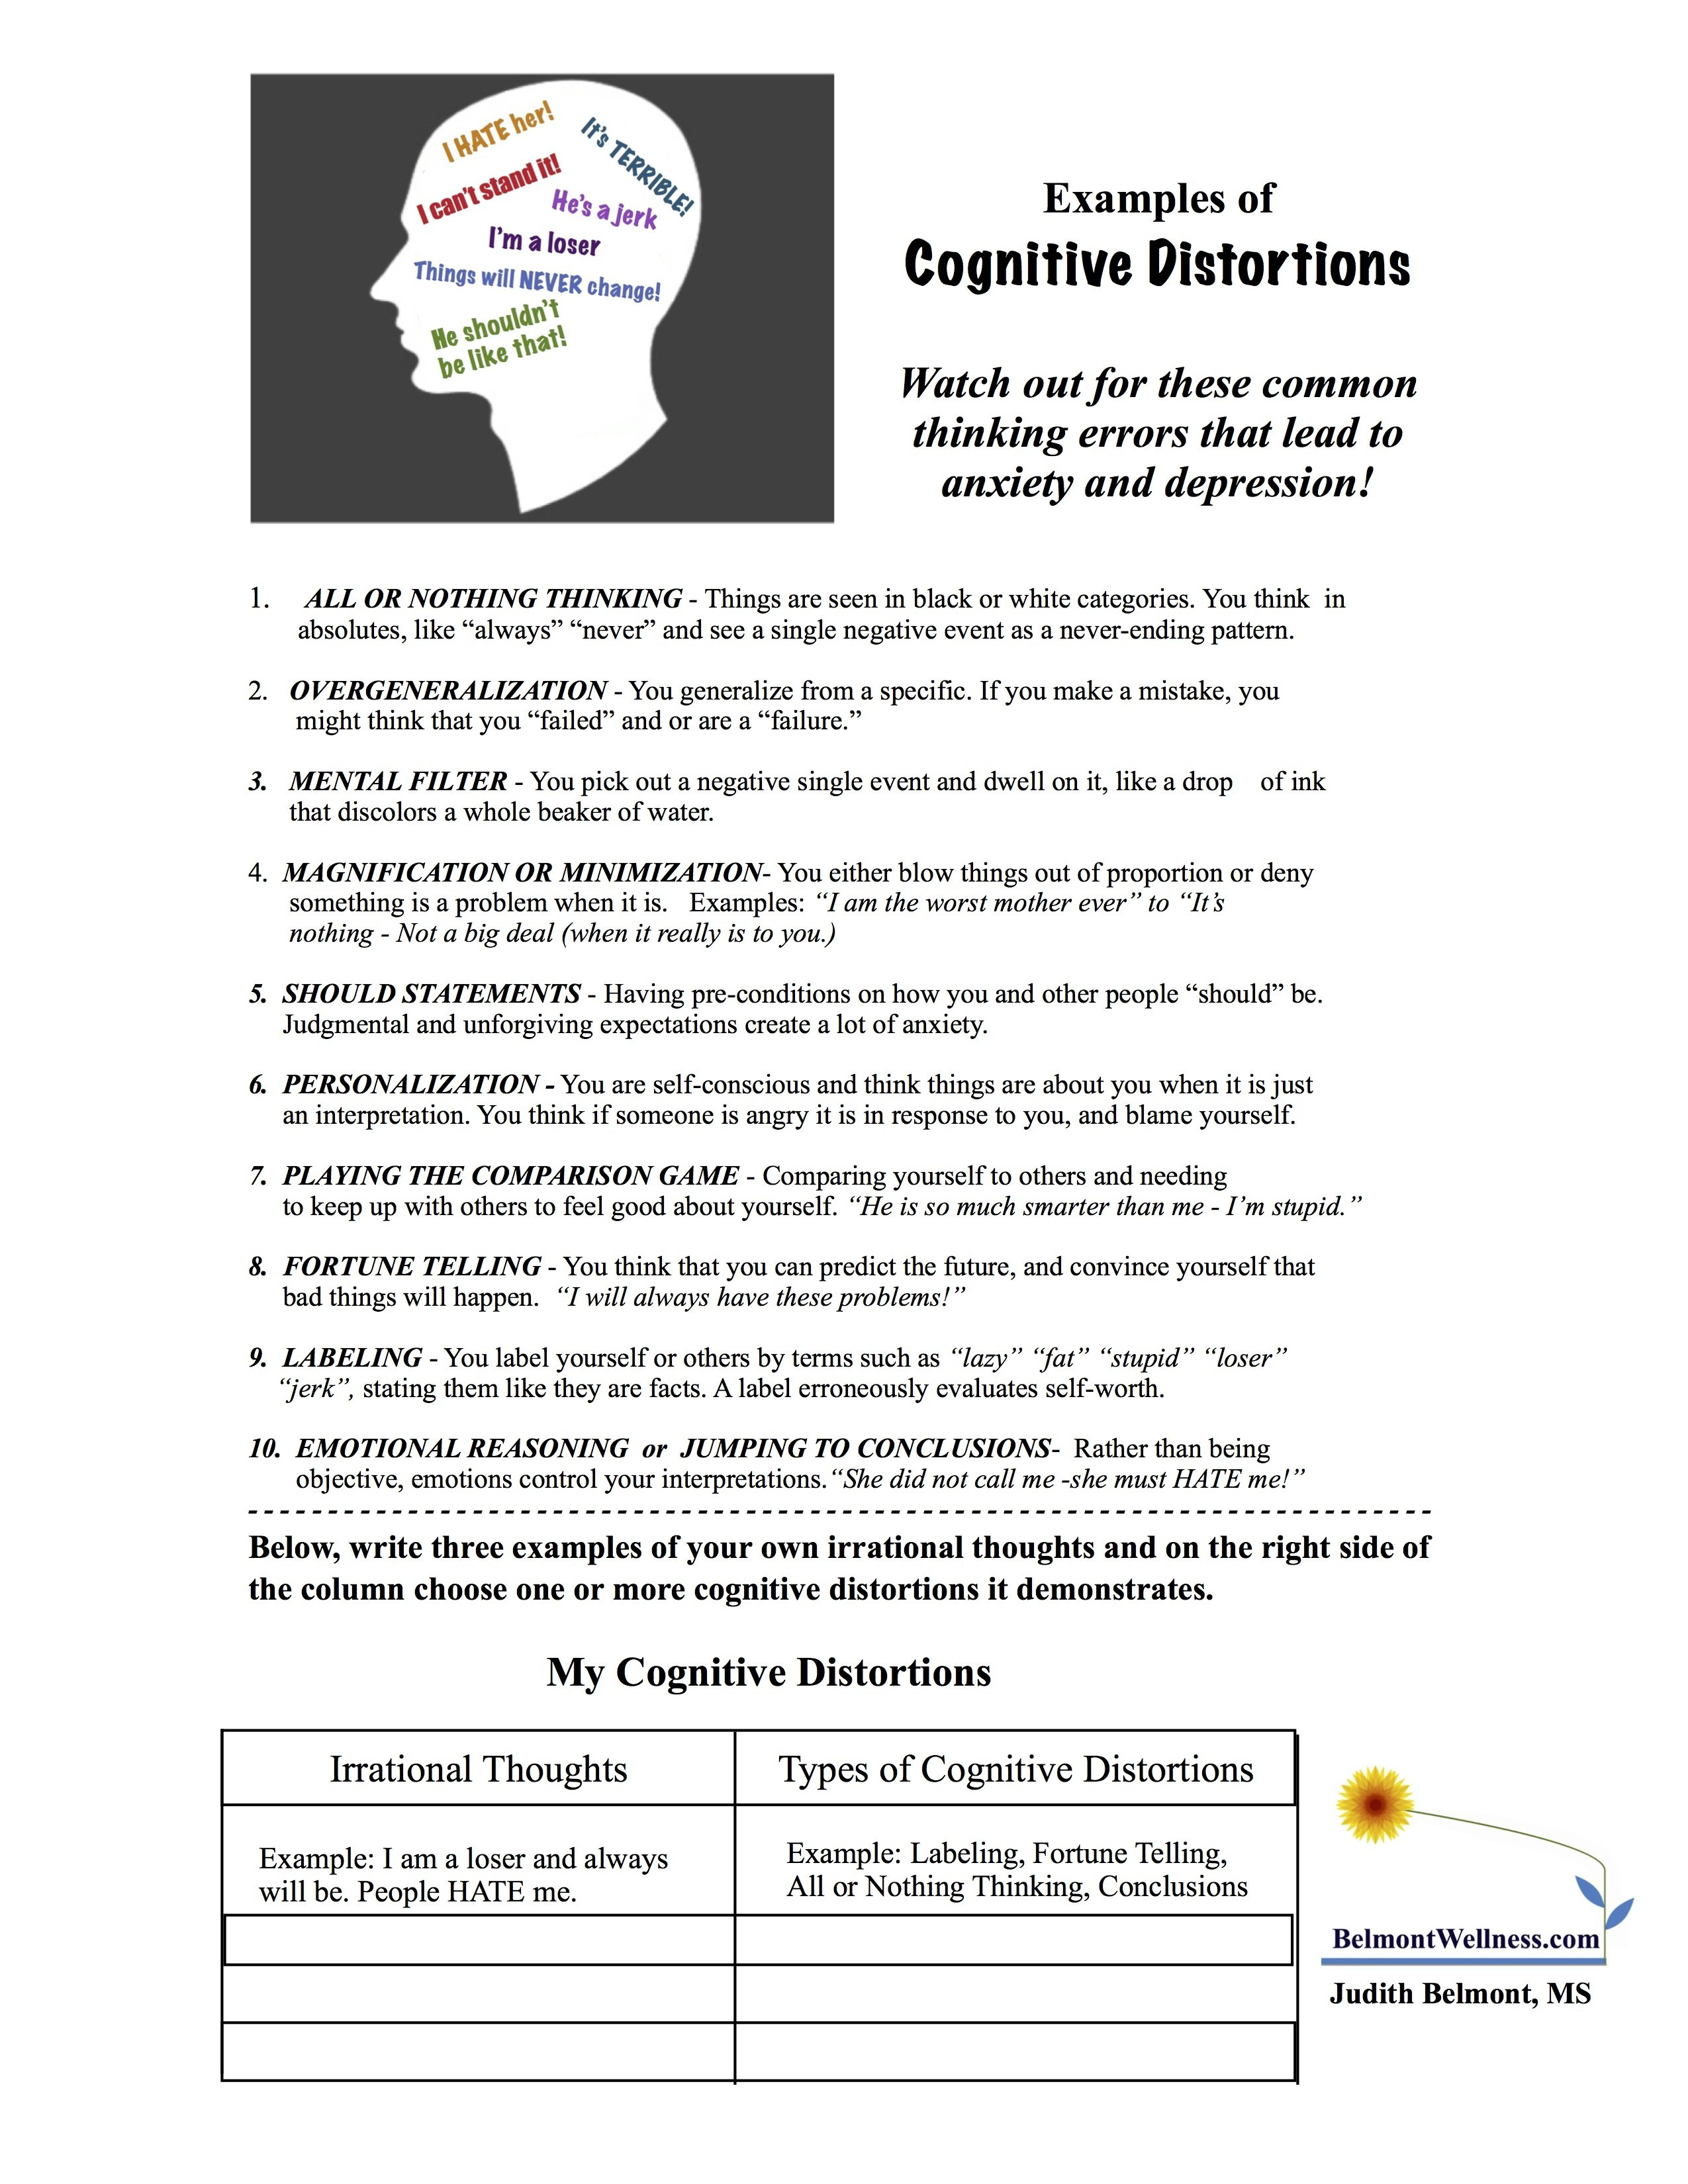 Free Printable Coping Skills Worksheets For Adults 77 Images In Also Free Printable Coping Skills Worksheets For Adults